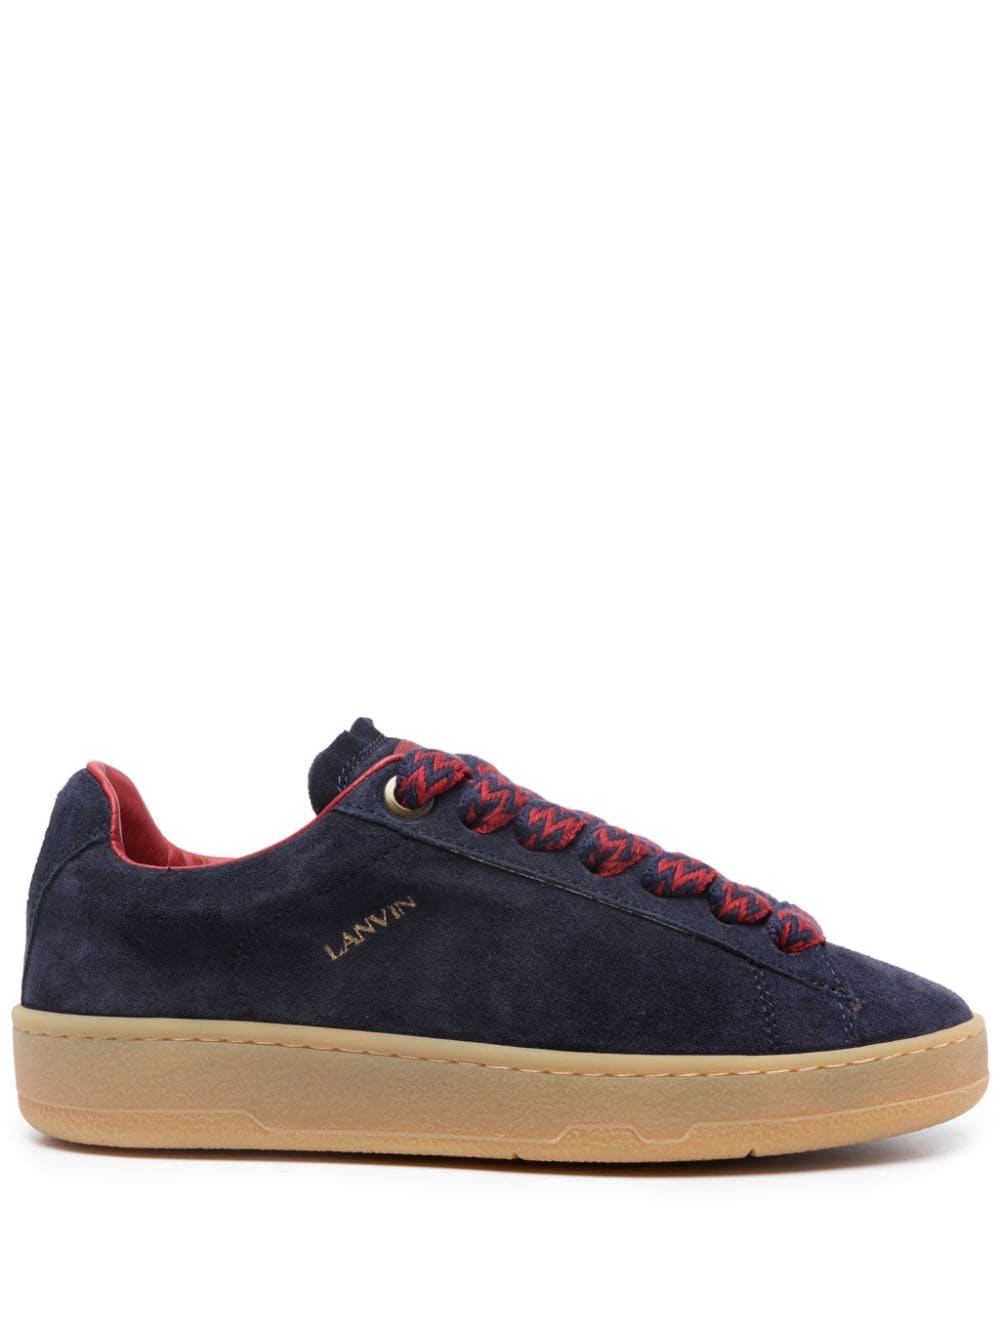 Image 1 of Lanvin Lite Curb suede sneakers